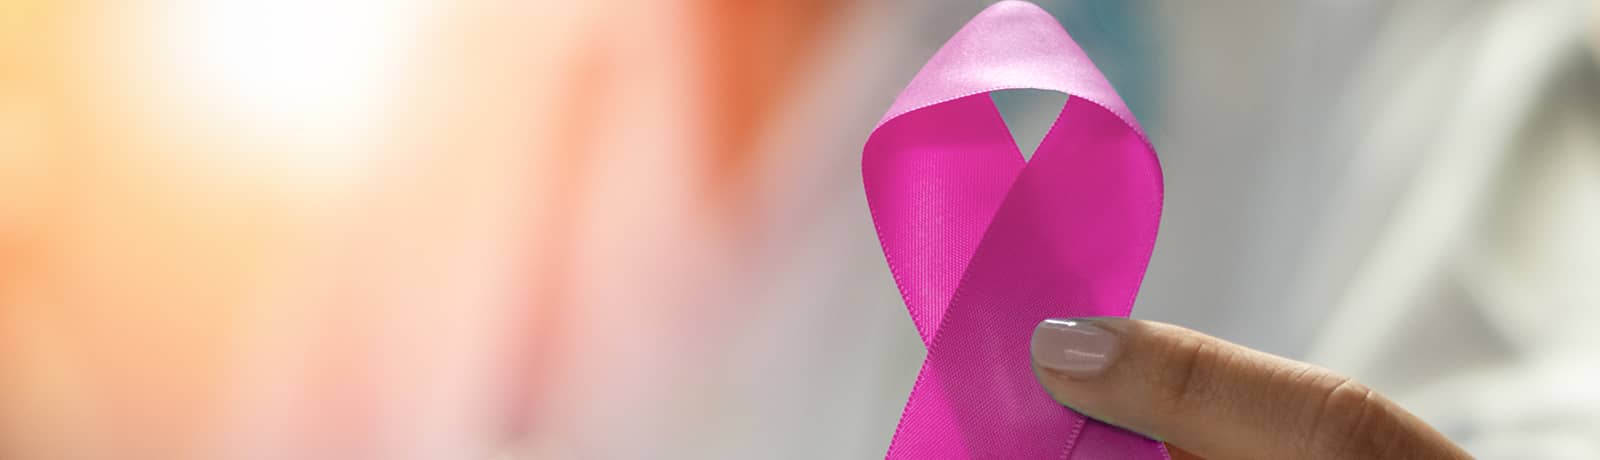 Valley offers advanced mastectomy and lumpectomy options for breast cancer surgery, including nipple-sparing mastectomy and IORT during lumpectomy.